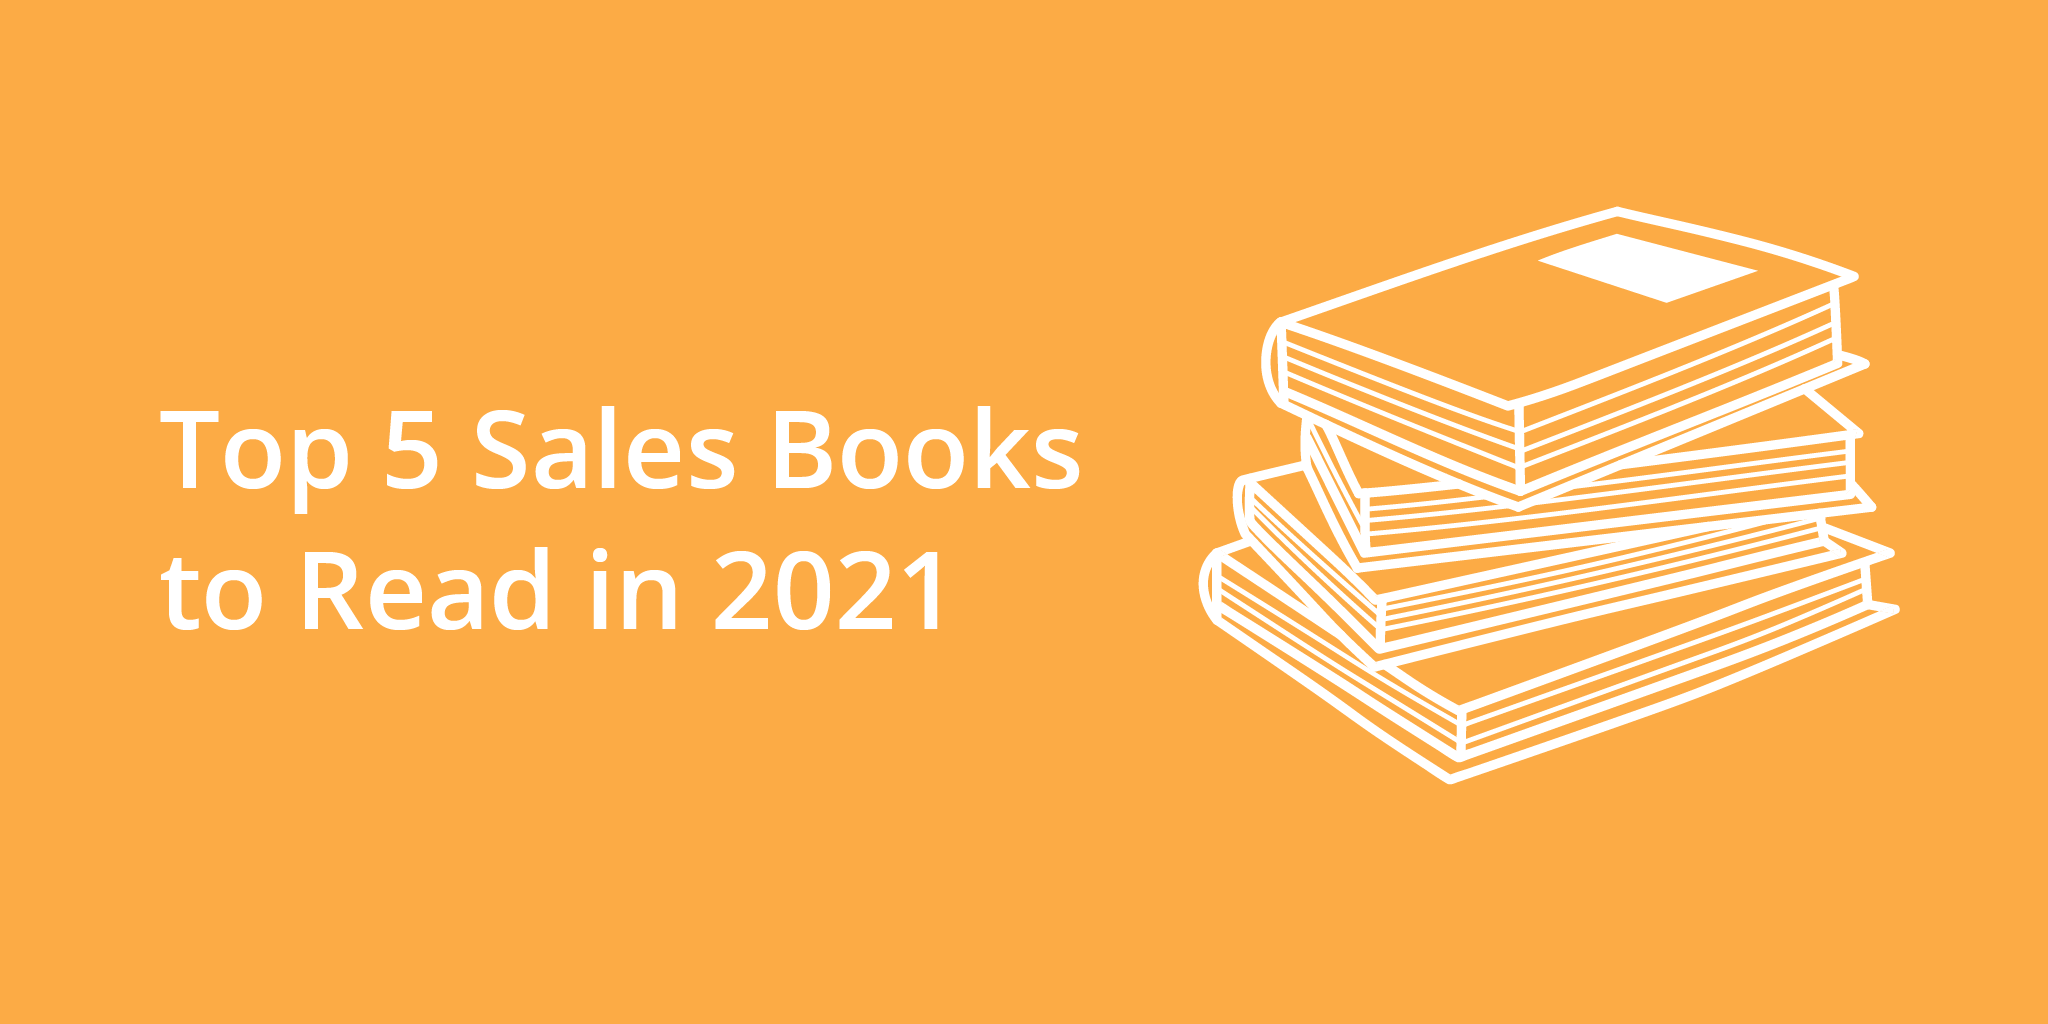 Top 5 Sales Books to Read in 2021 | Telephones for business